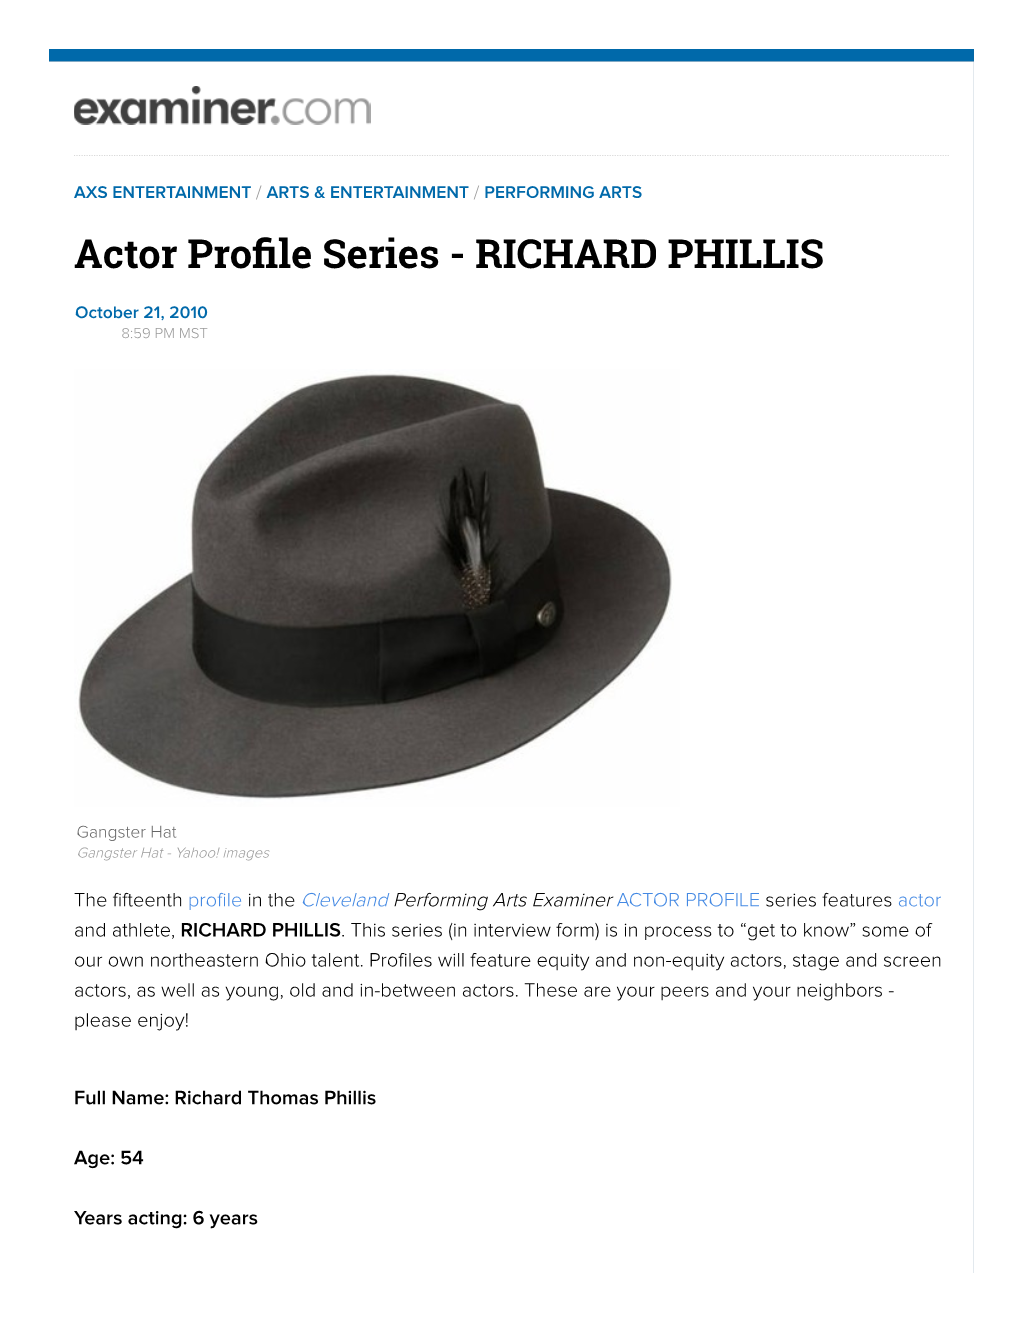 ACTOR PROFILE Series Features Actor and Athlete, RICHARD PHILLIS